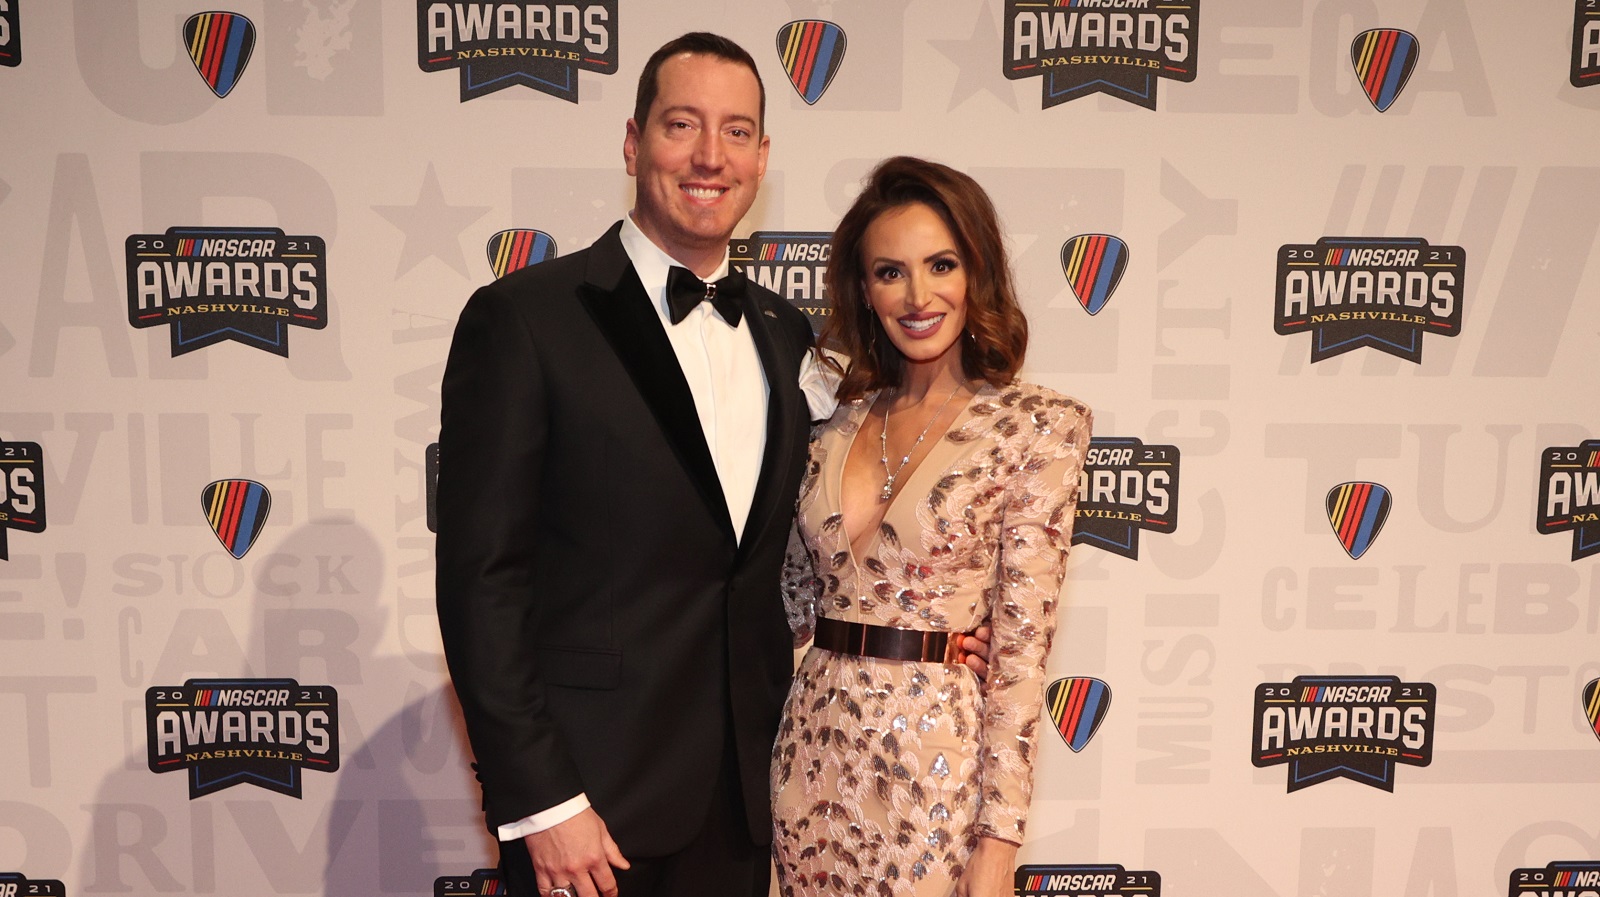 NASCAR Cup Series driver Kyle Busch and wife Samantha Busch pose on the red carpet prior to the NASCAR Champion's Banquet at the Music City Center on Dec. 2, 2021, in Nashville, Tennessee.